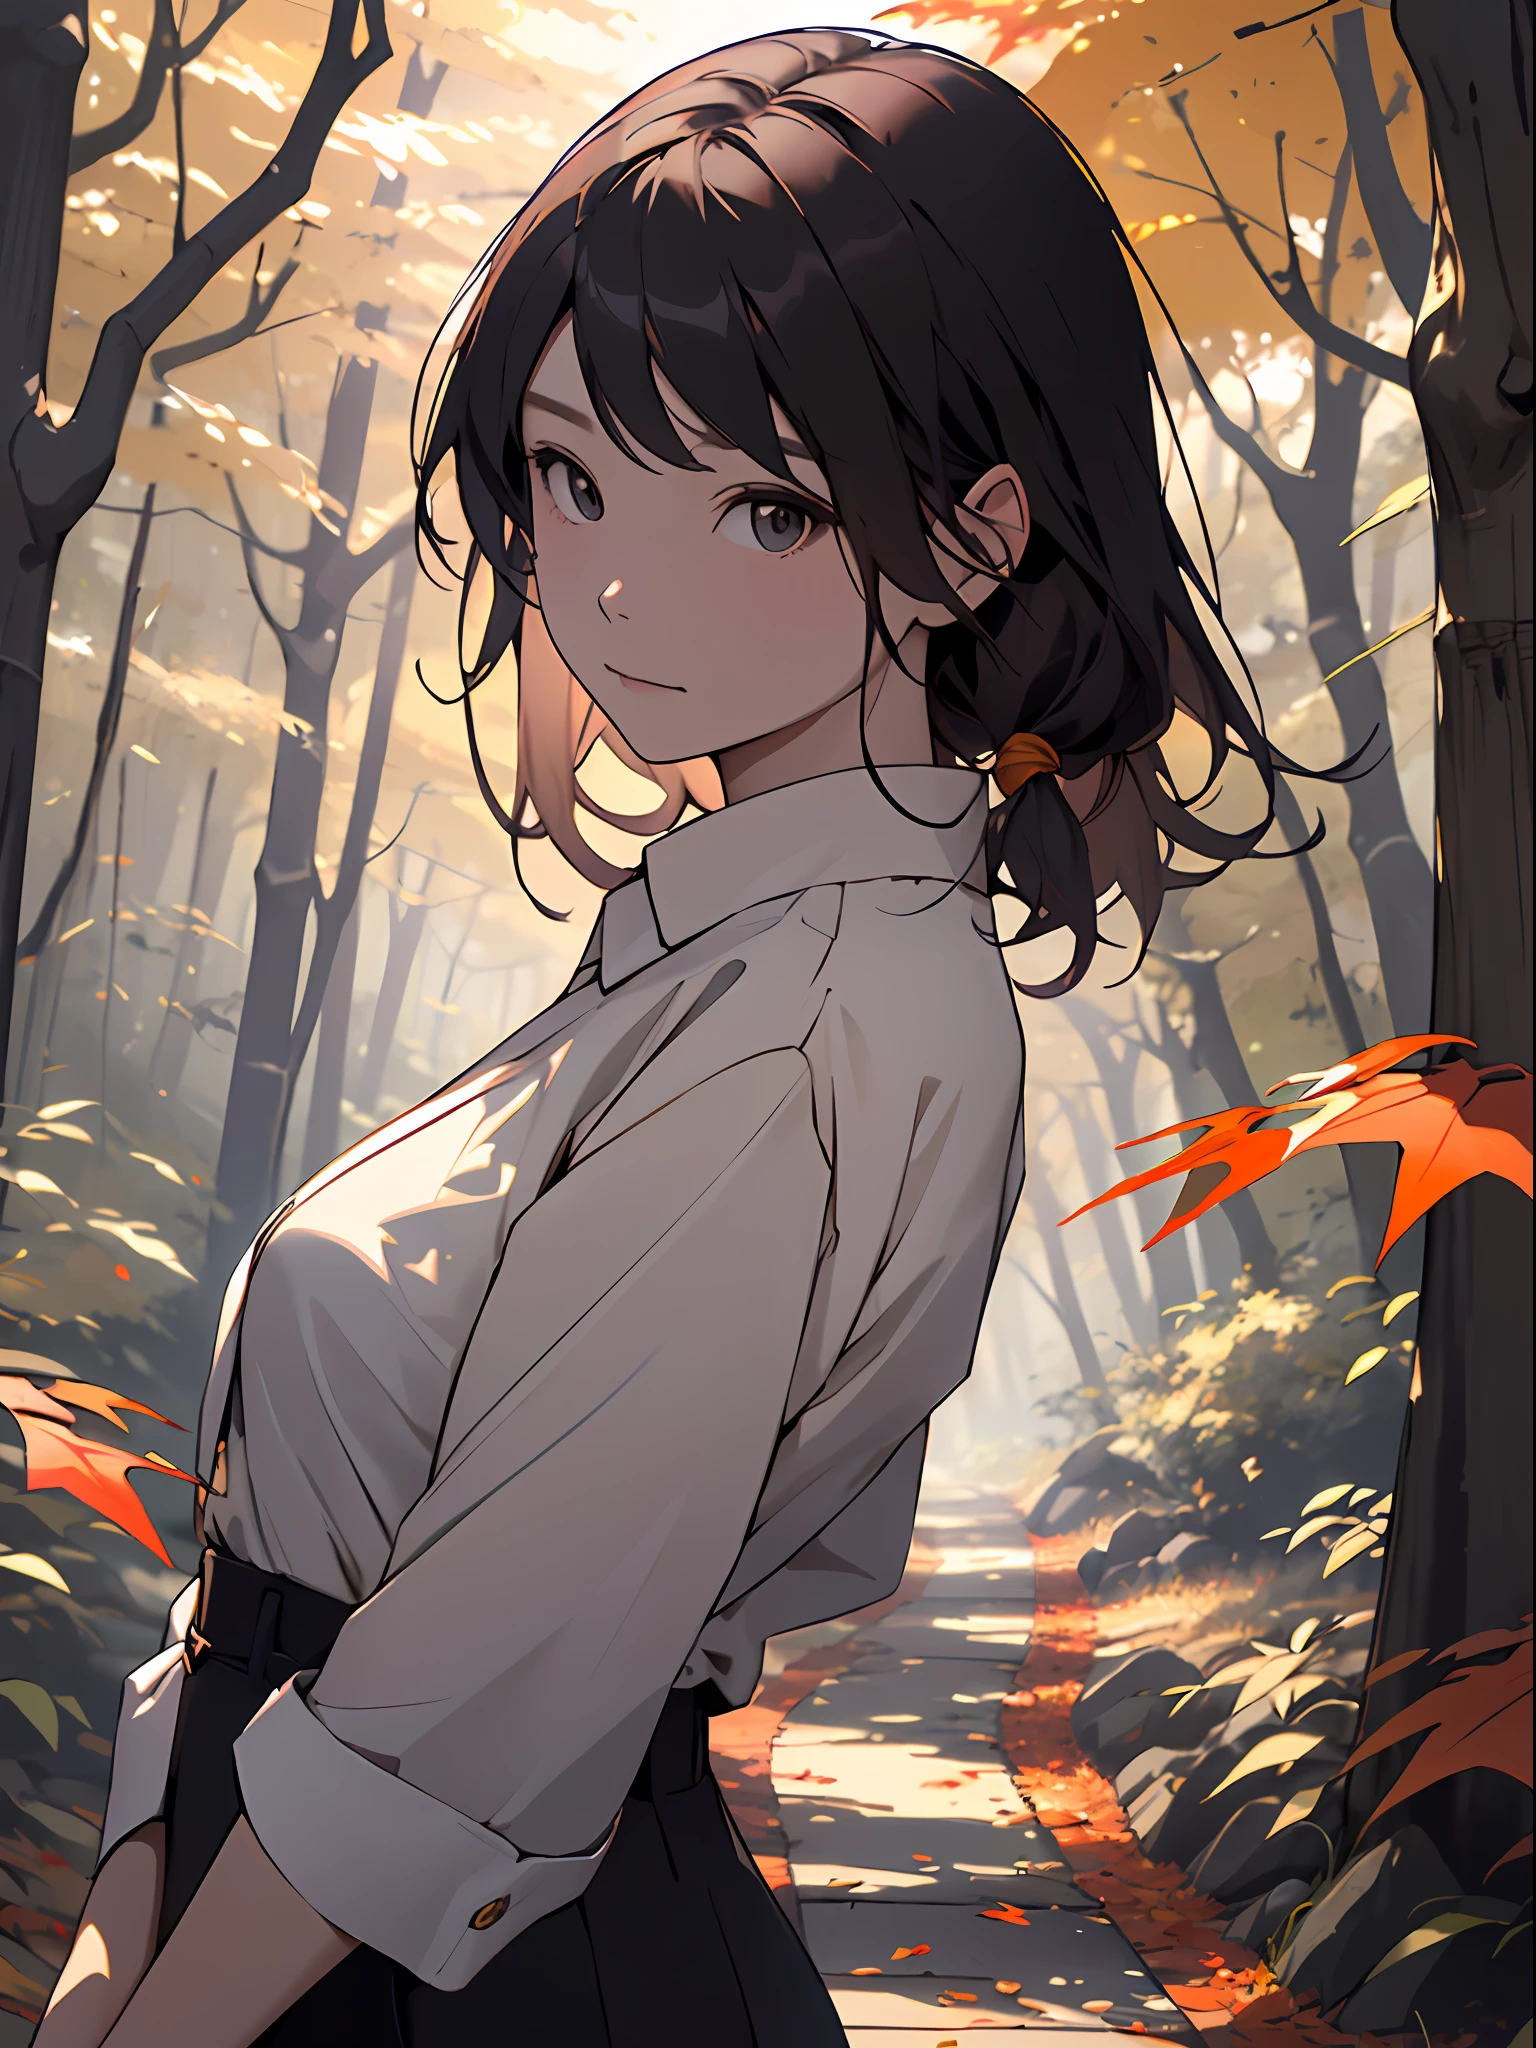 realisitic、((Forest of autumn leaves))、Woman in the forest and sunshine, a 20 yo woman、shorth hair, Nice hairstyle, Nice clothes、Looking at the camera、Colored leaves